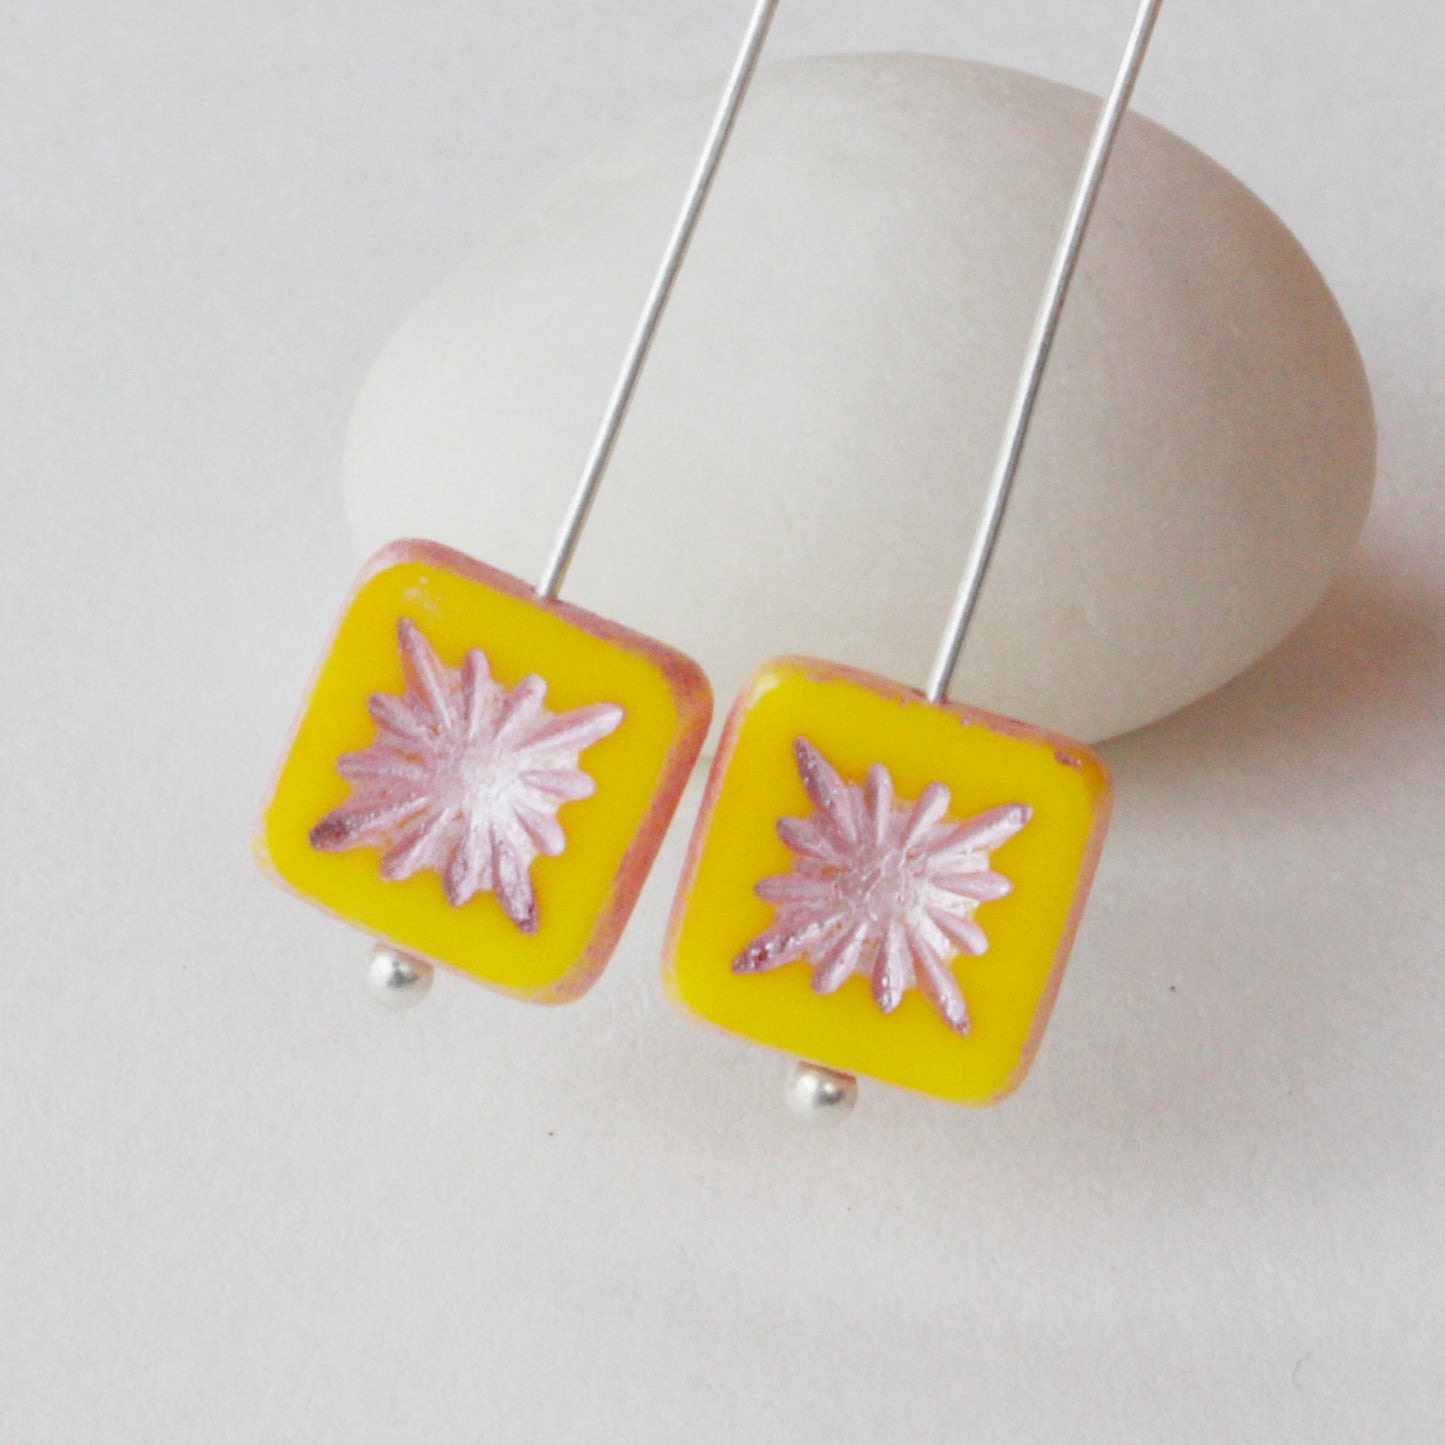 10mm Glass Tile Beads - Yellow with Pink Wash - 10 or 30